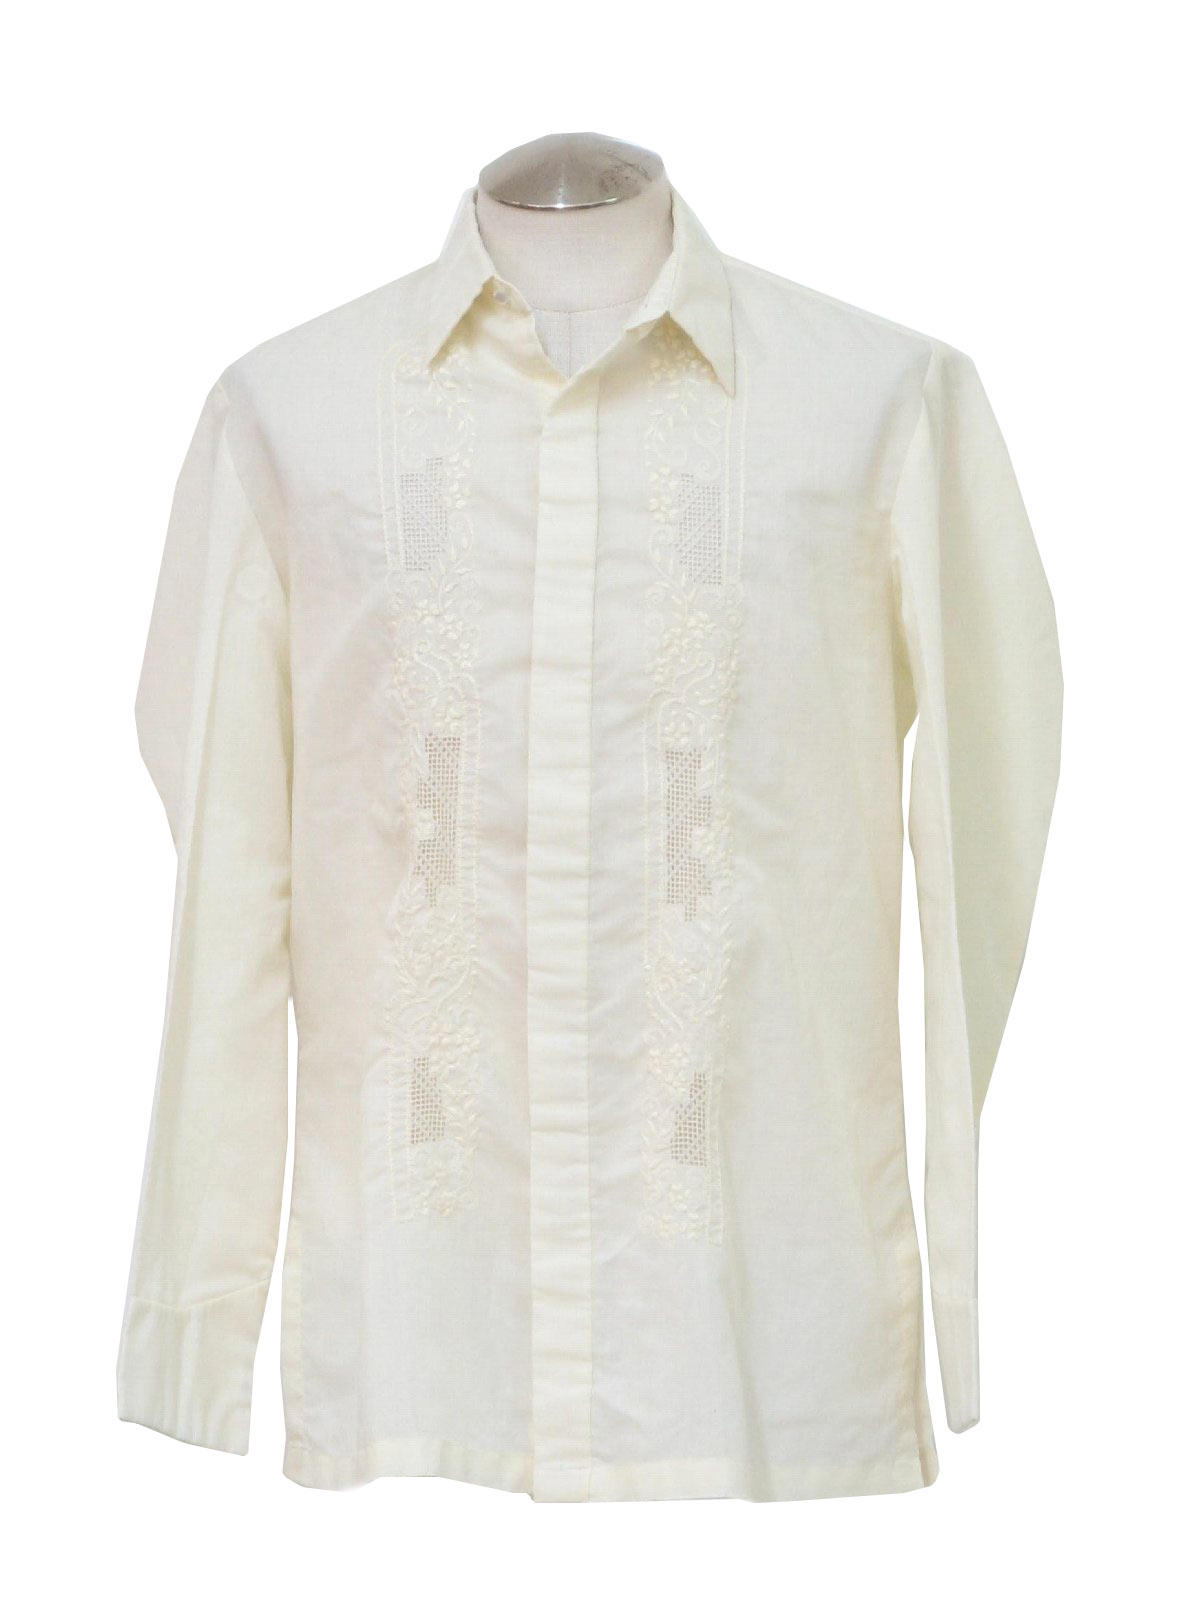 Vintage 70s Hippie Shirt: Late 70s early 80s -Neek- Mens off white ...